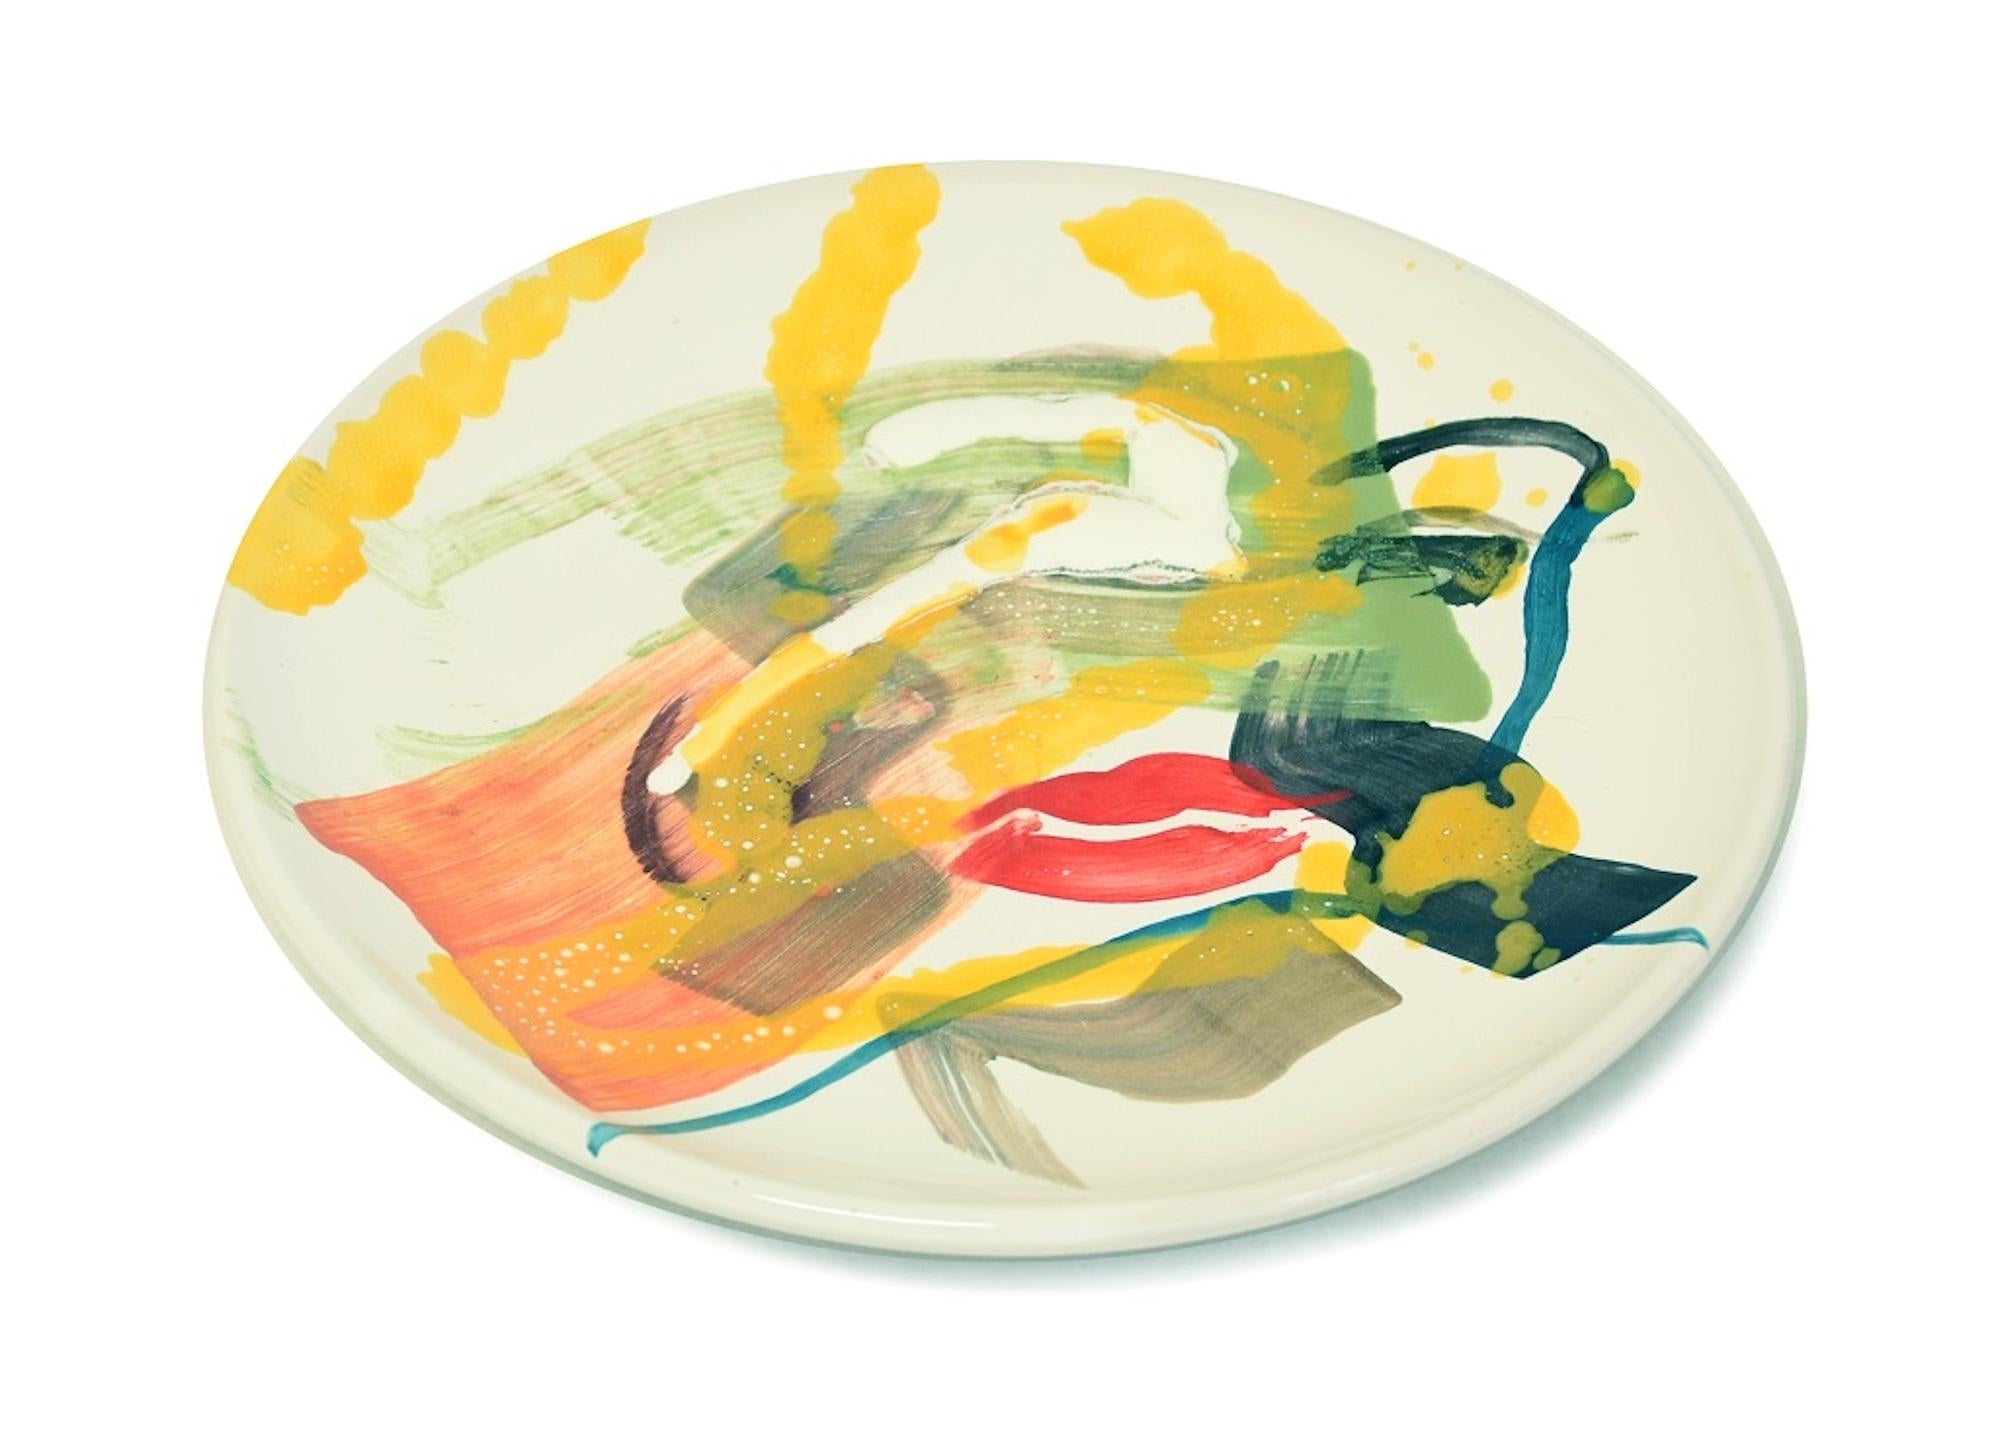 A Kiss of Autumn is a hand-made flat ceramic dish realized by the Russian emerging artist, Anastasia Kurakina in 2019. 

This is a  beautiful ceramic dish representing two red, sensual and full lips on an abstract foreground with colors of the